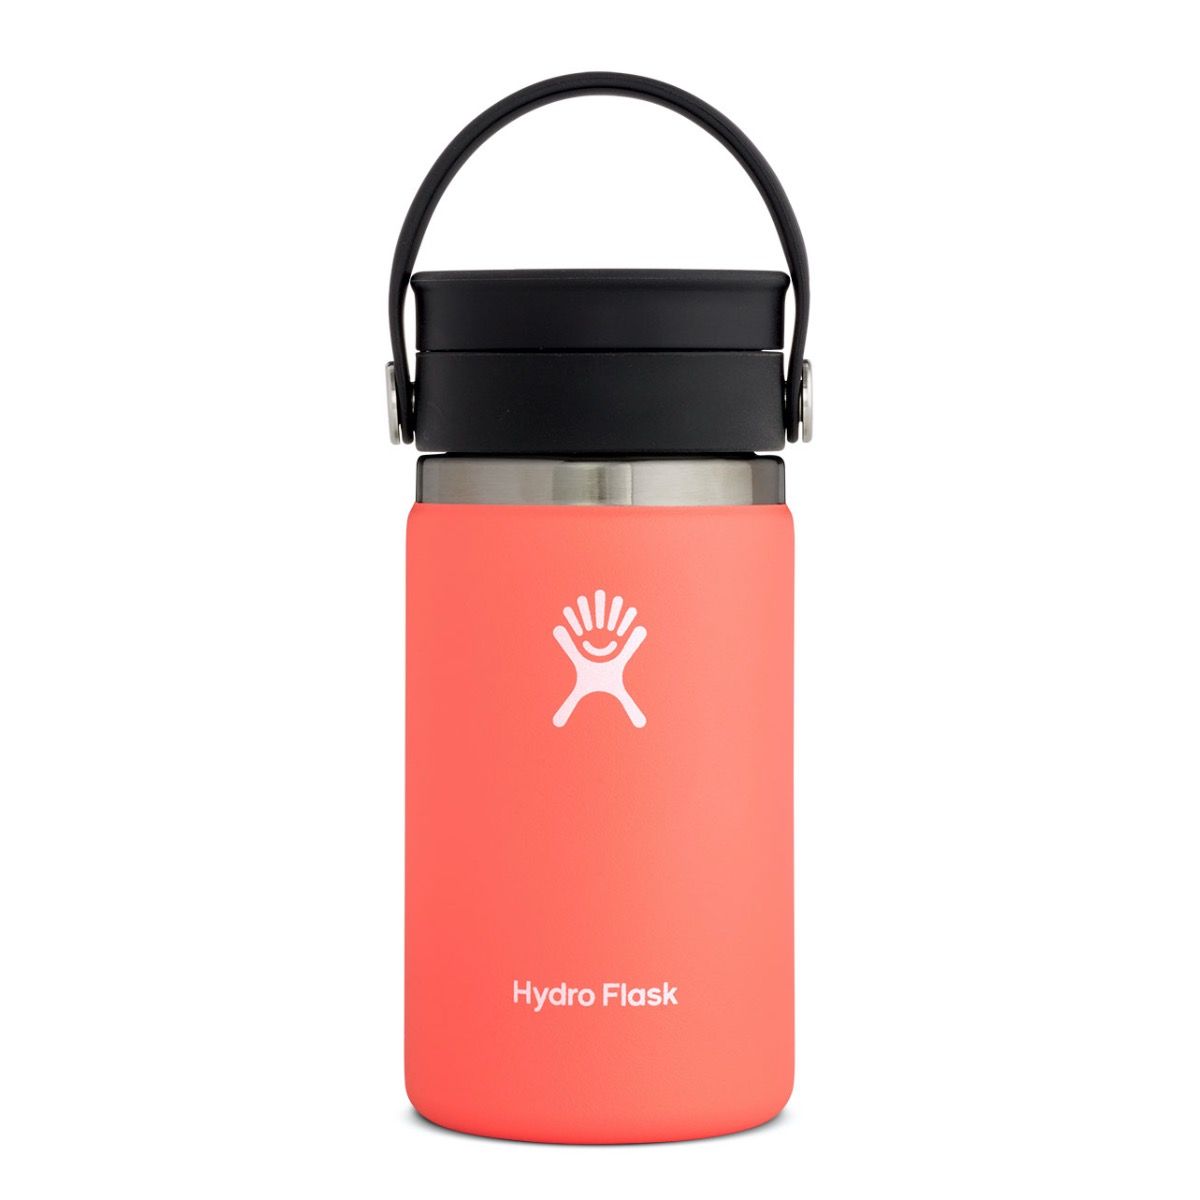 Hydro Flask - 12oz. Vacuum Insulated Stainless Steel Sip Lid Coffee Flask